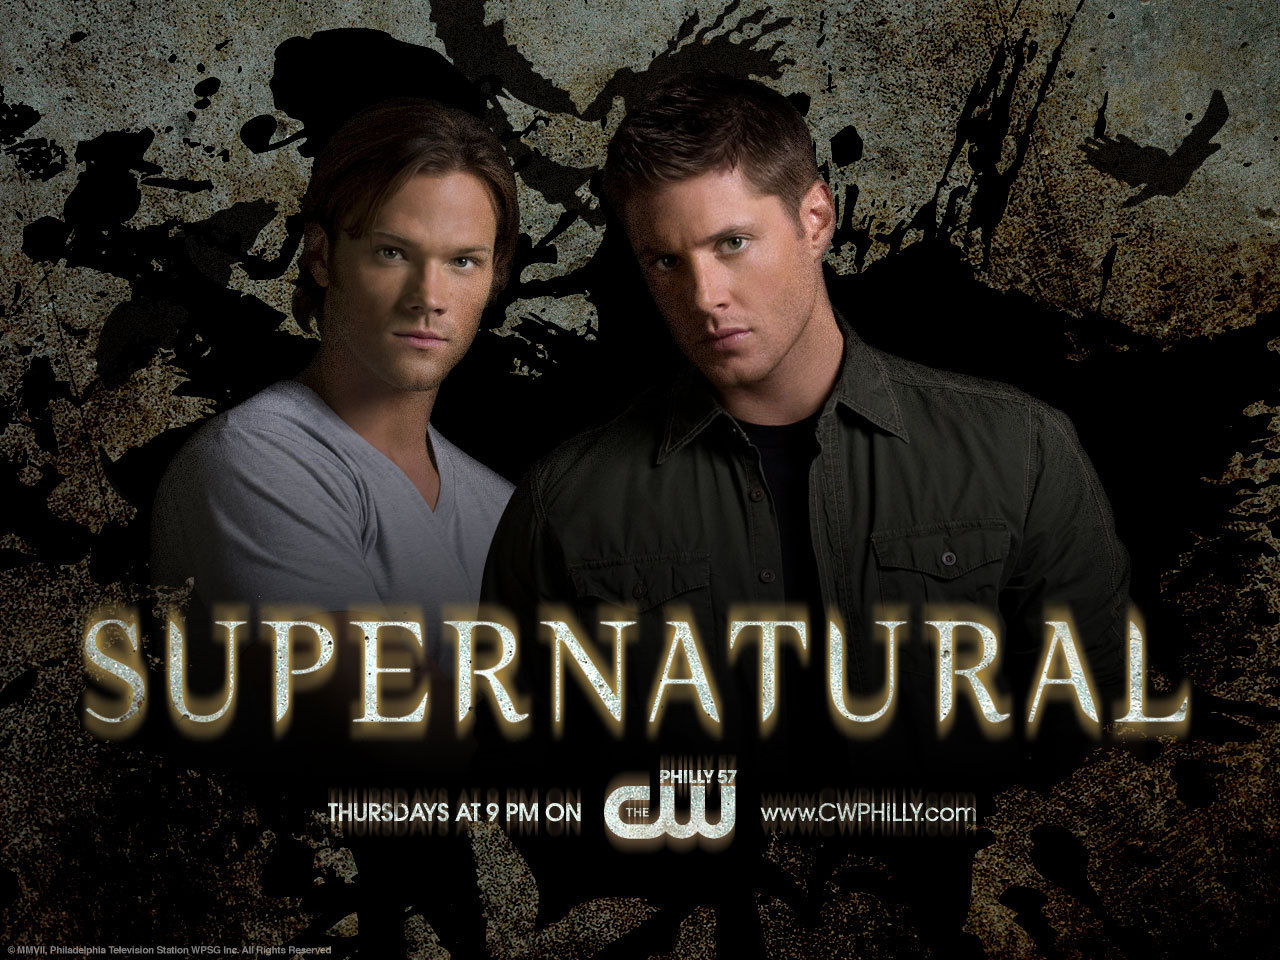 Supernatural Image HD Wallpaper And Background Photos